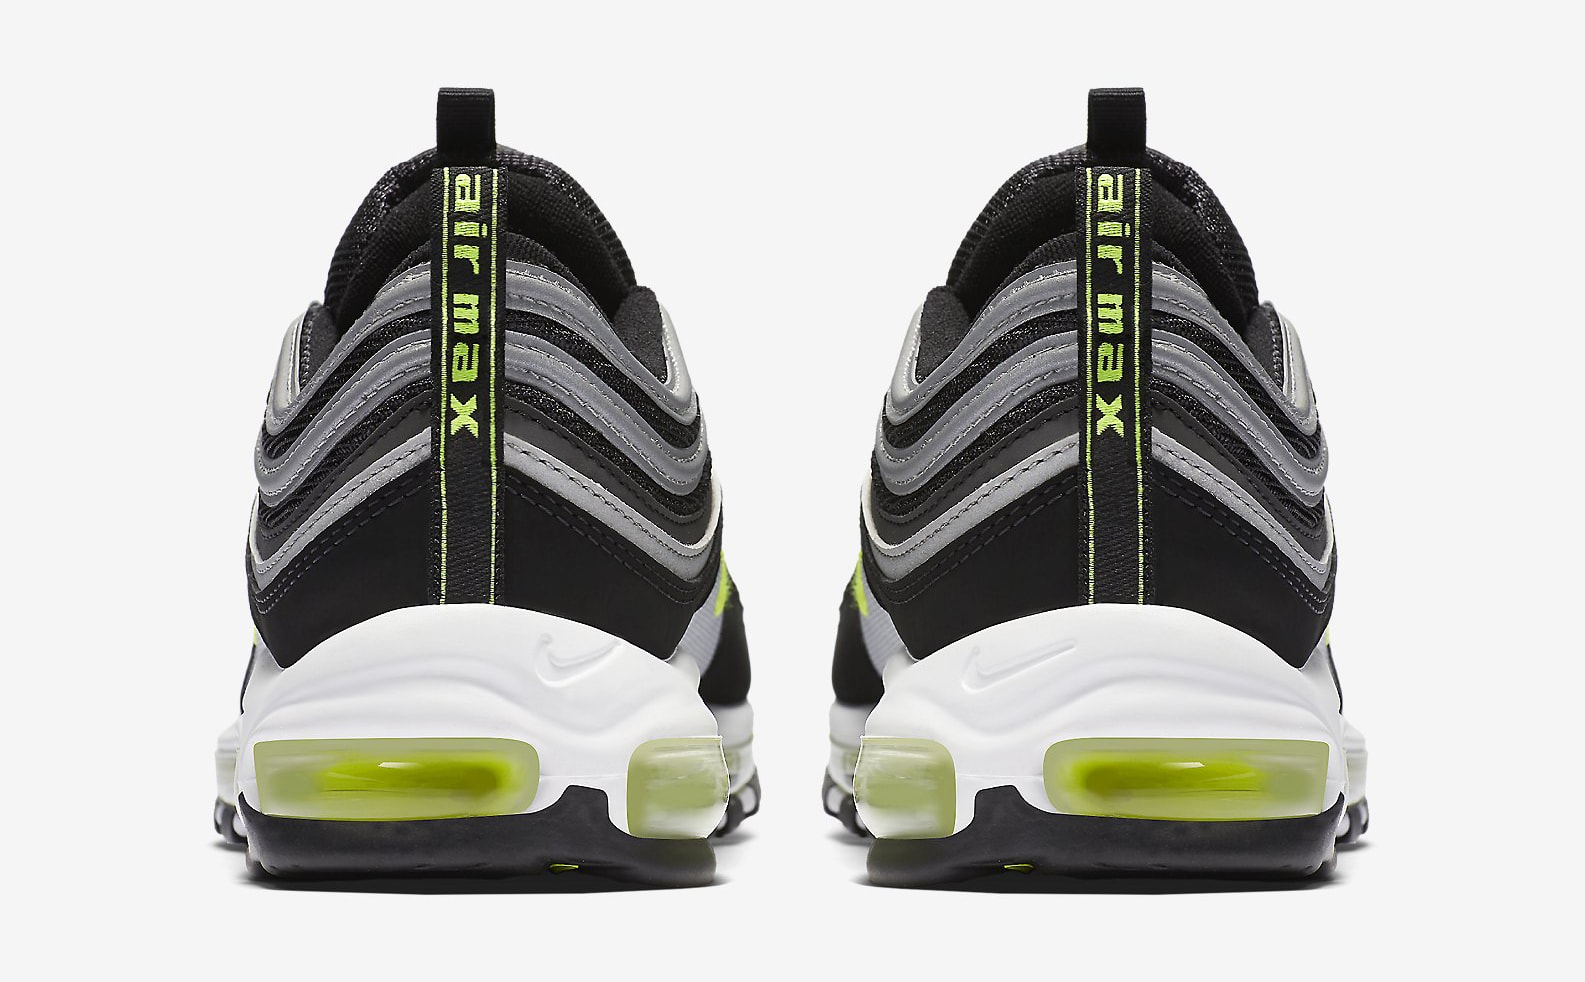 Neon Nike Air Max 97 921826 004 Sole Collector